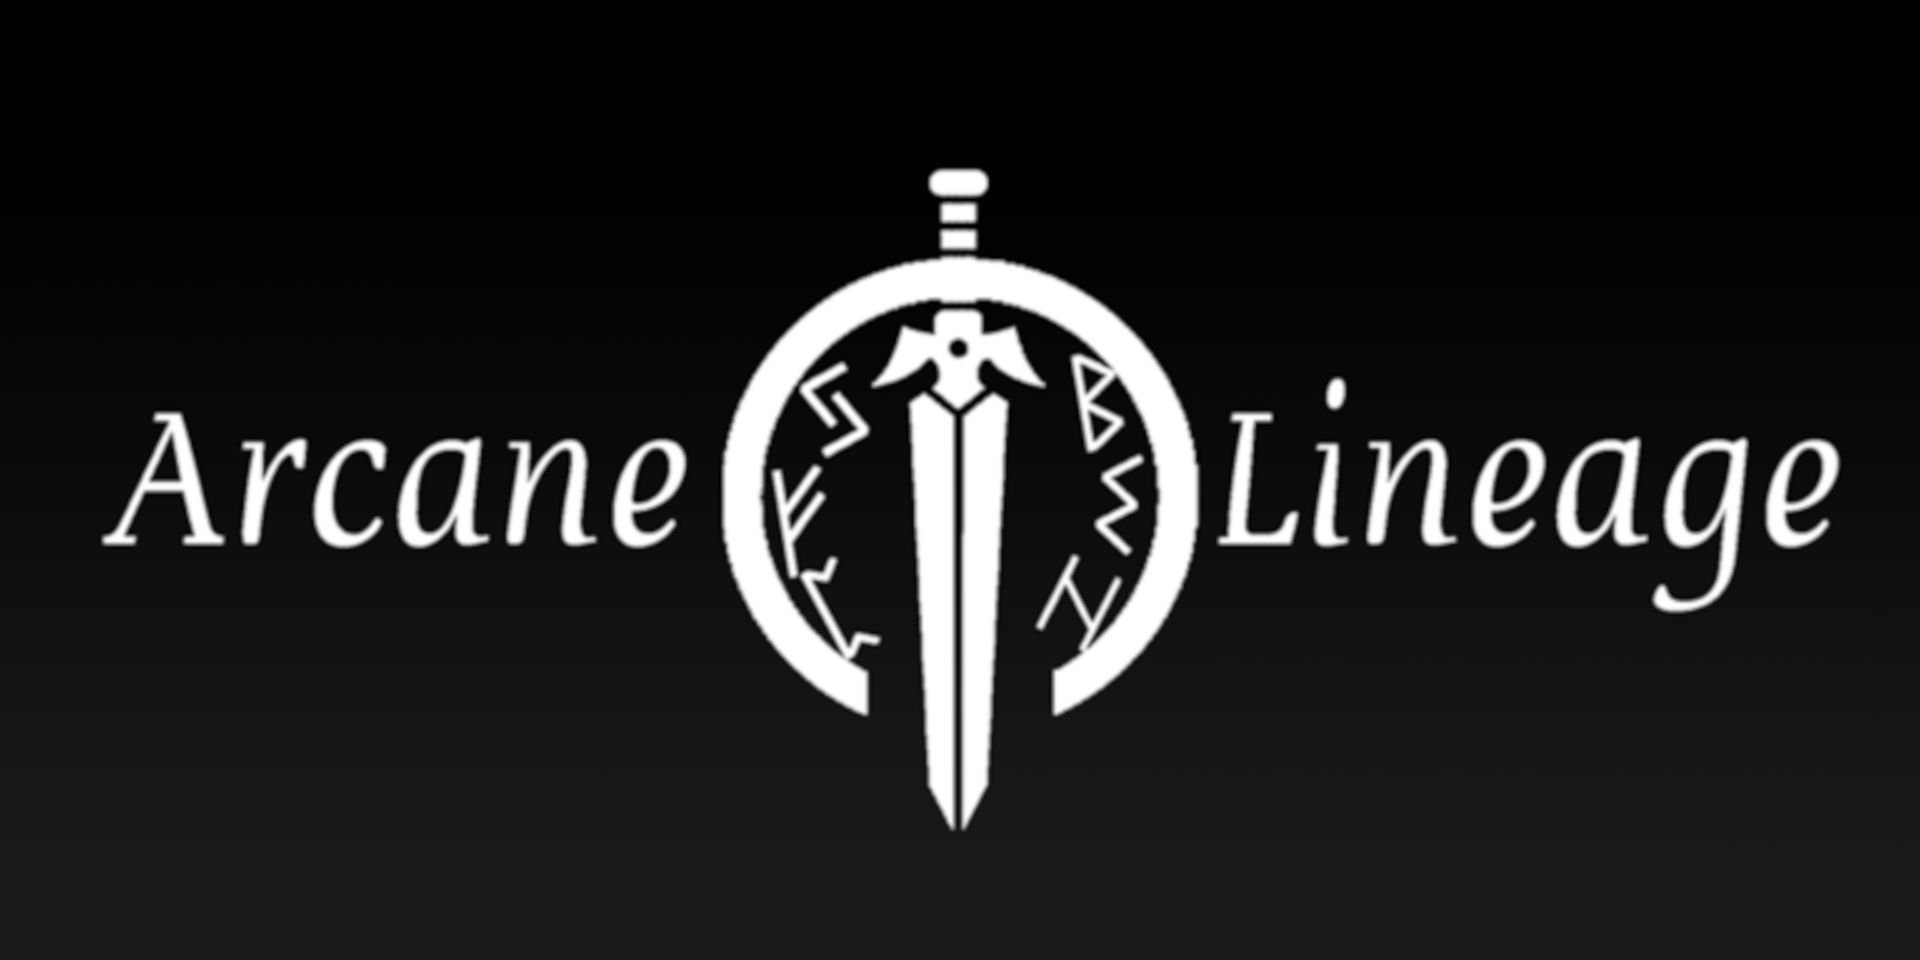 The official Arcane Lineage logo from Roblox.